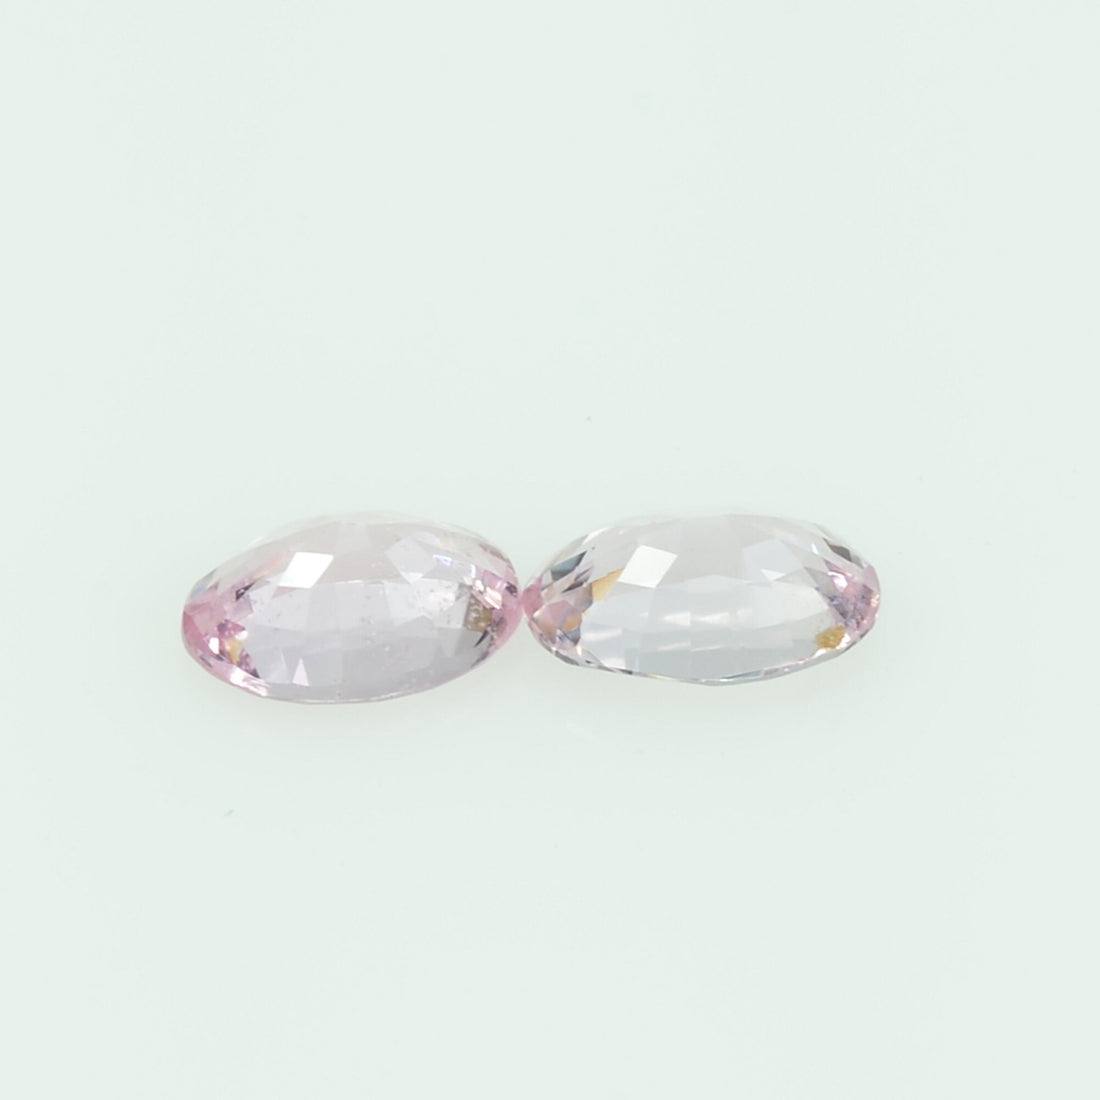 6x4 Natural Pink Sapphire Loose Gemstone oval Cut